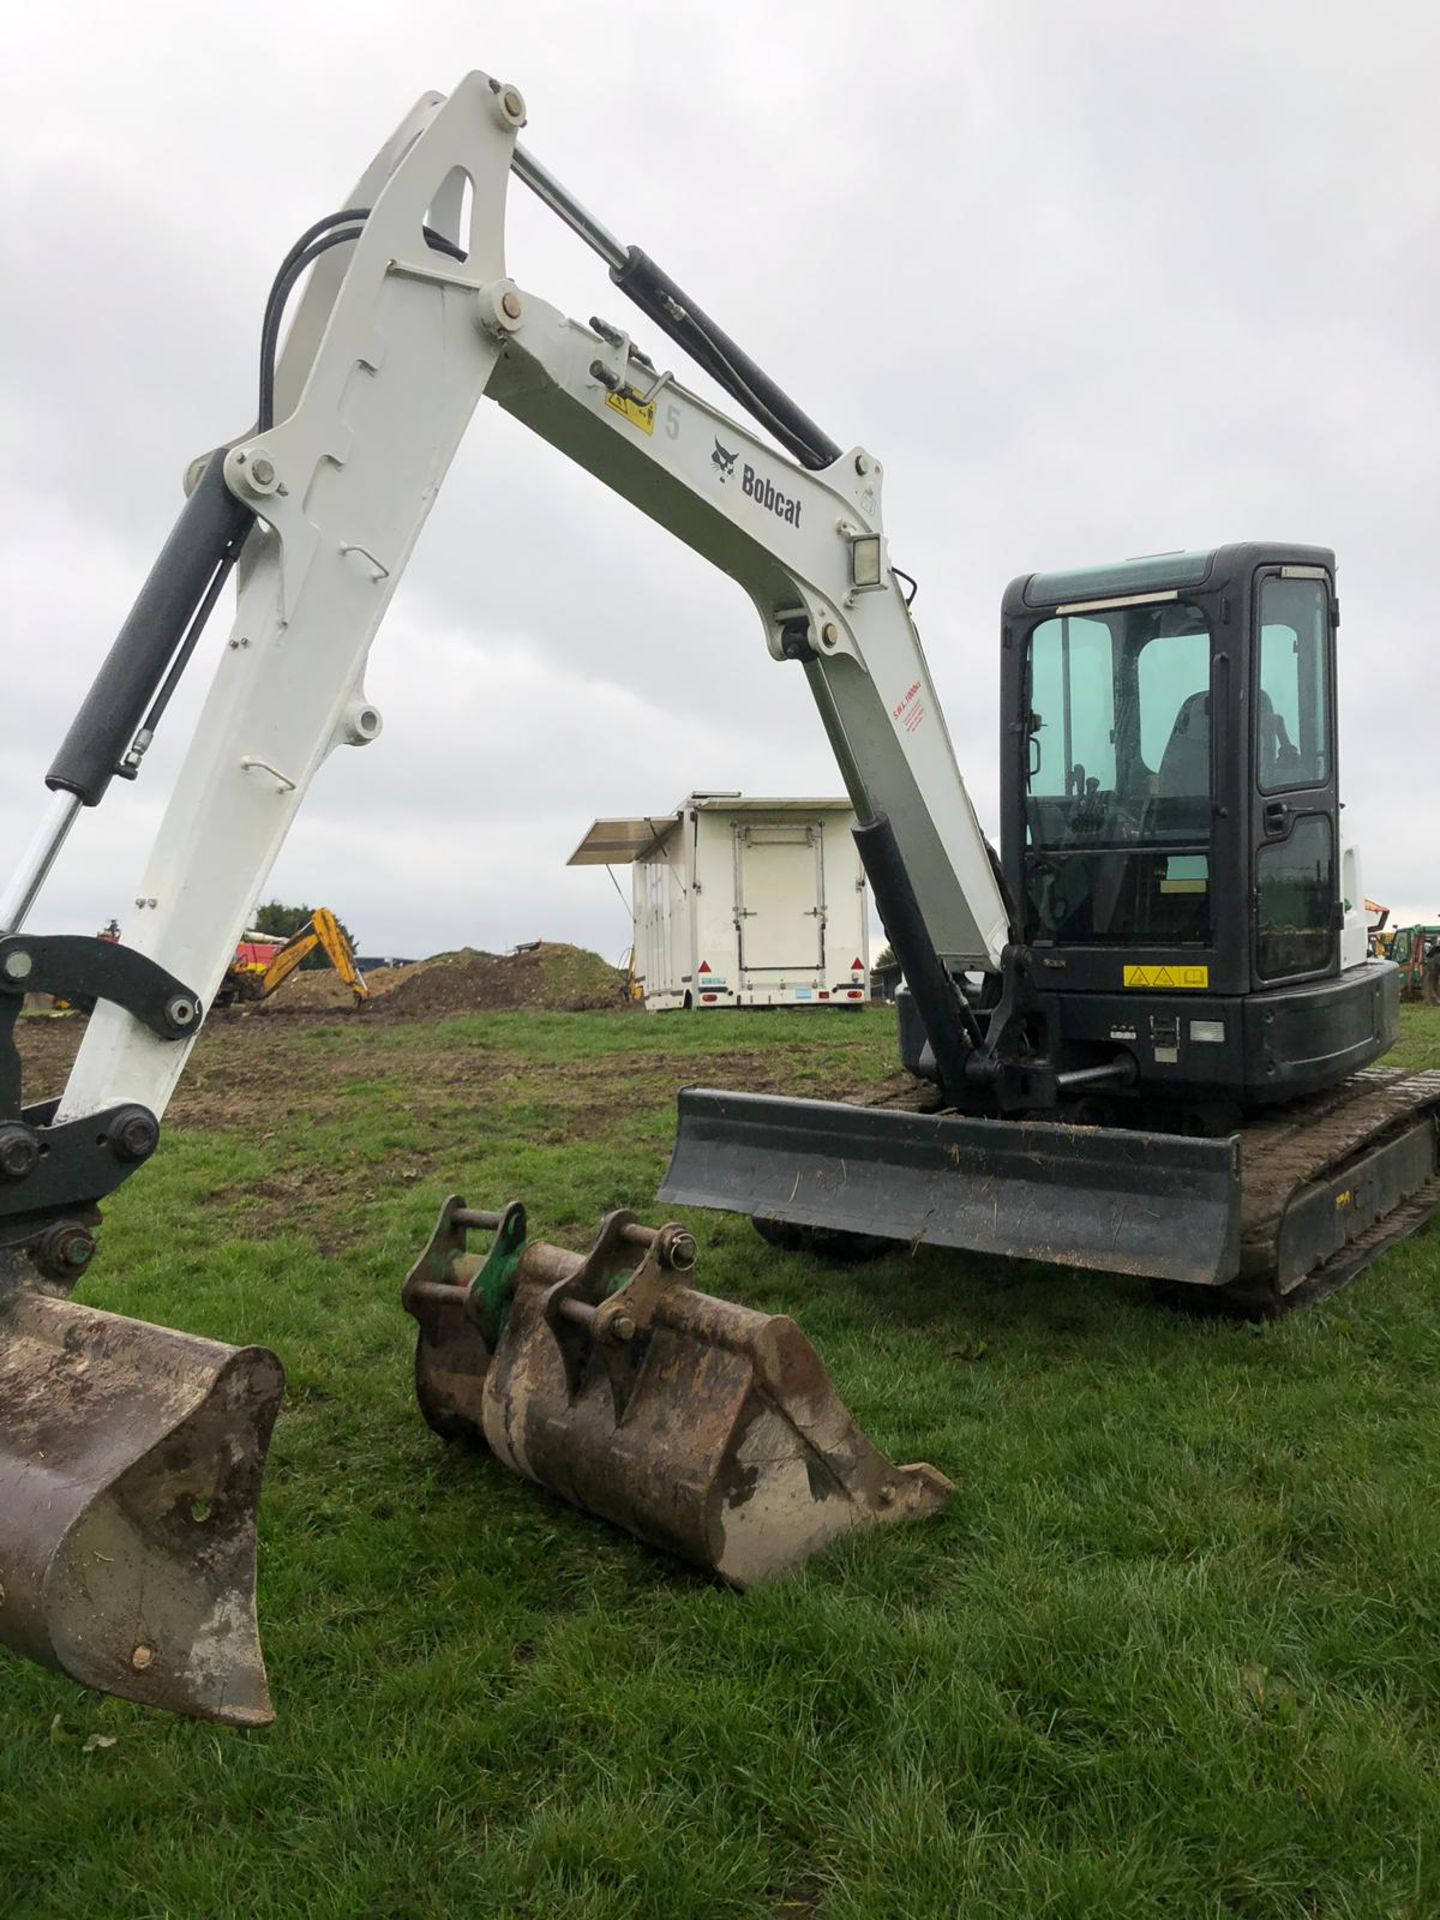 2011 BOBCAT E50 TRACKED DIGGER / EXCAVATOR, RUNS WORKS AND DIGS - COMES WITH 3 X BUCKETS *PLUS VAT* - Image 2 of 13